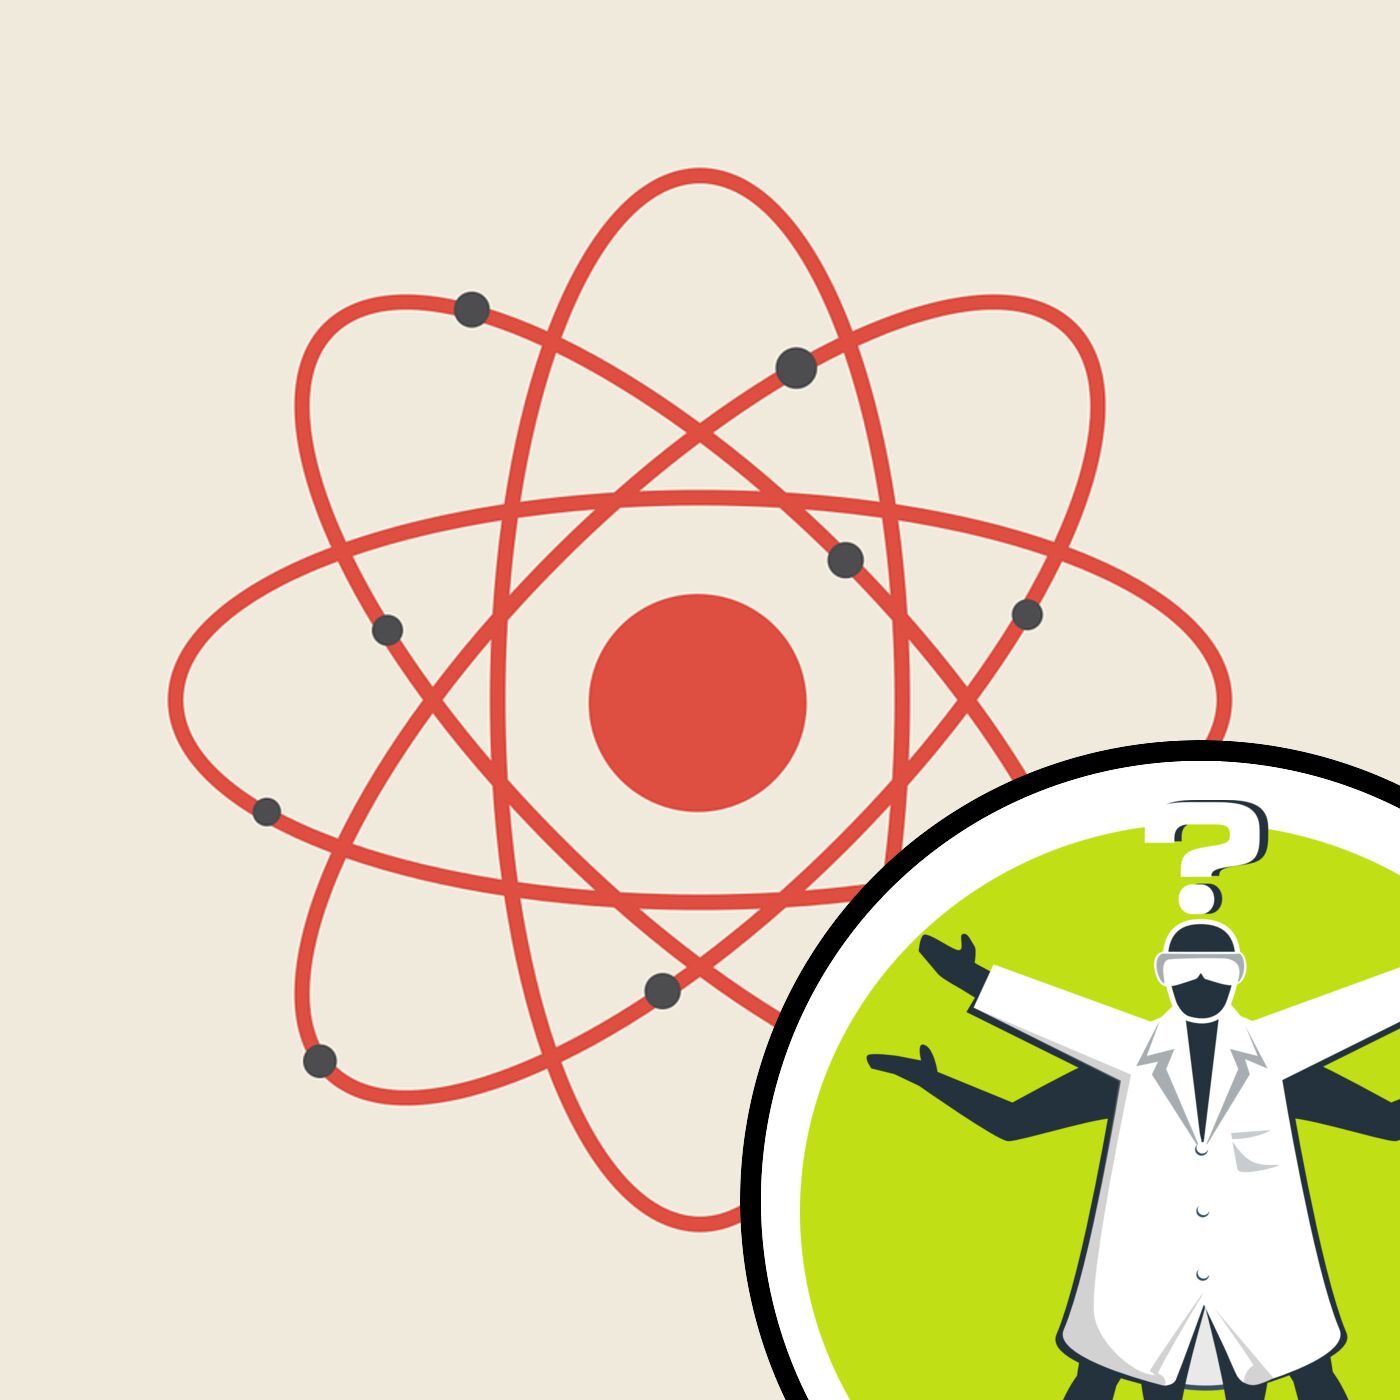 How far can electrons get away from their atom?